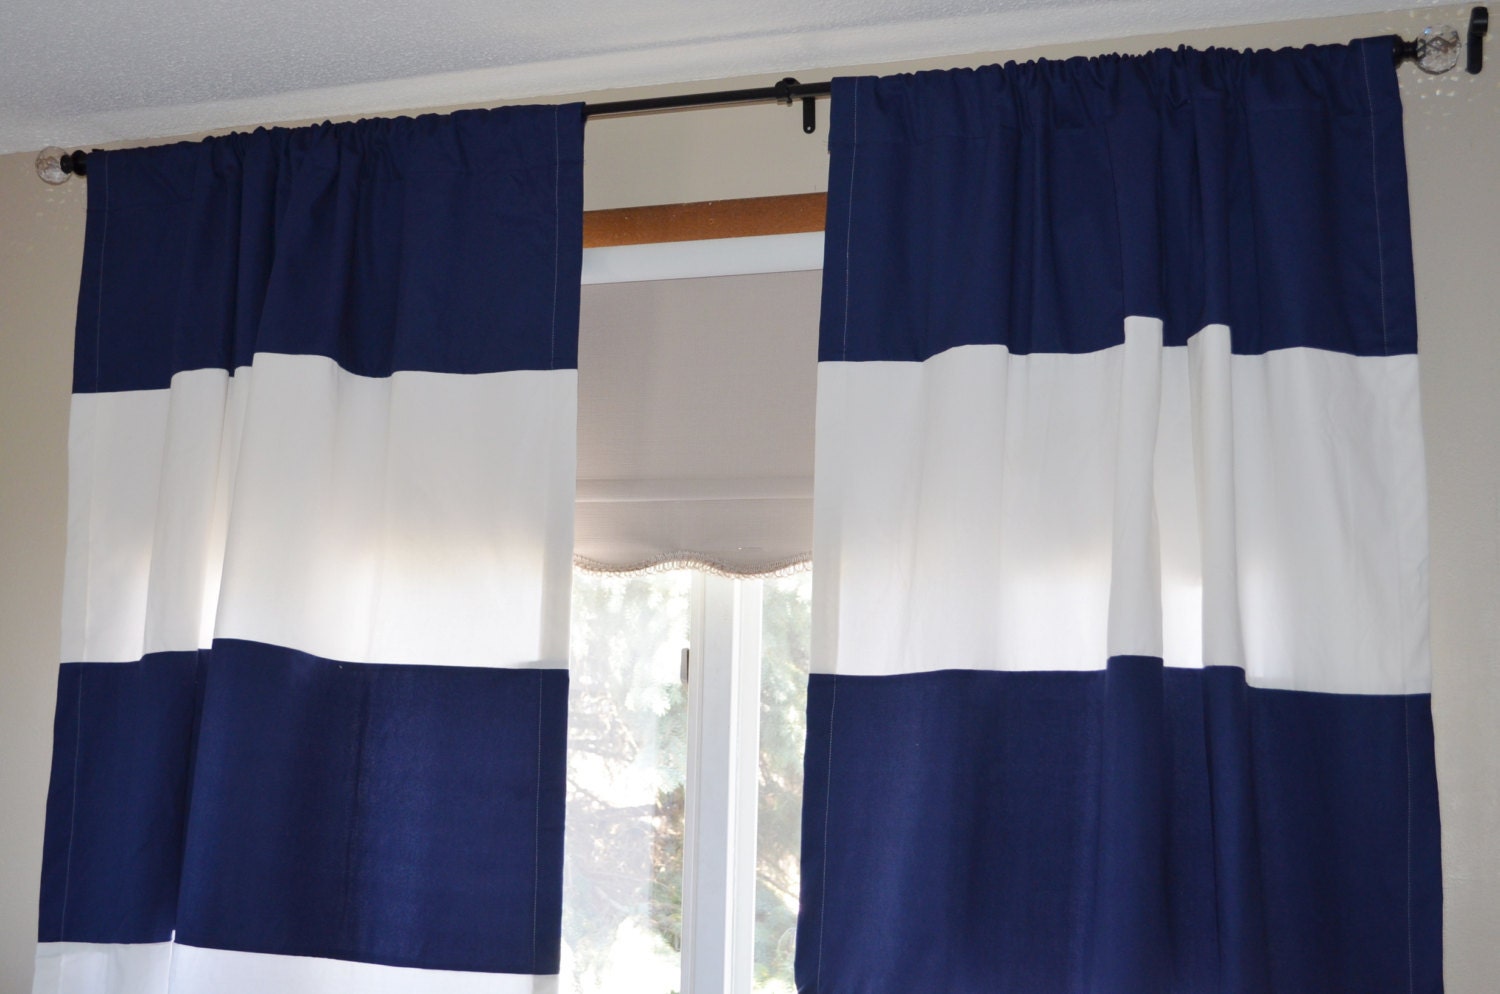 Vinyl Bathroom Window Curtains Navy and White Striped Tablecl